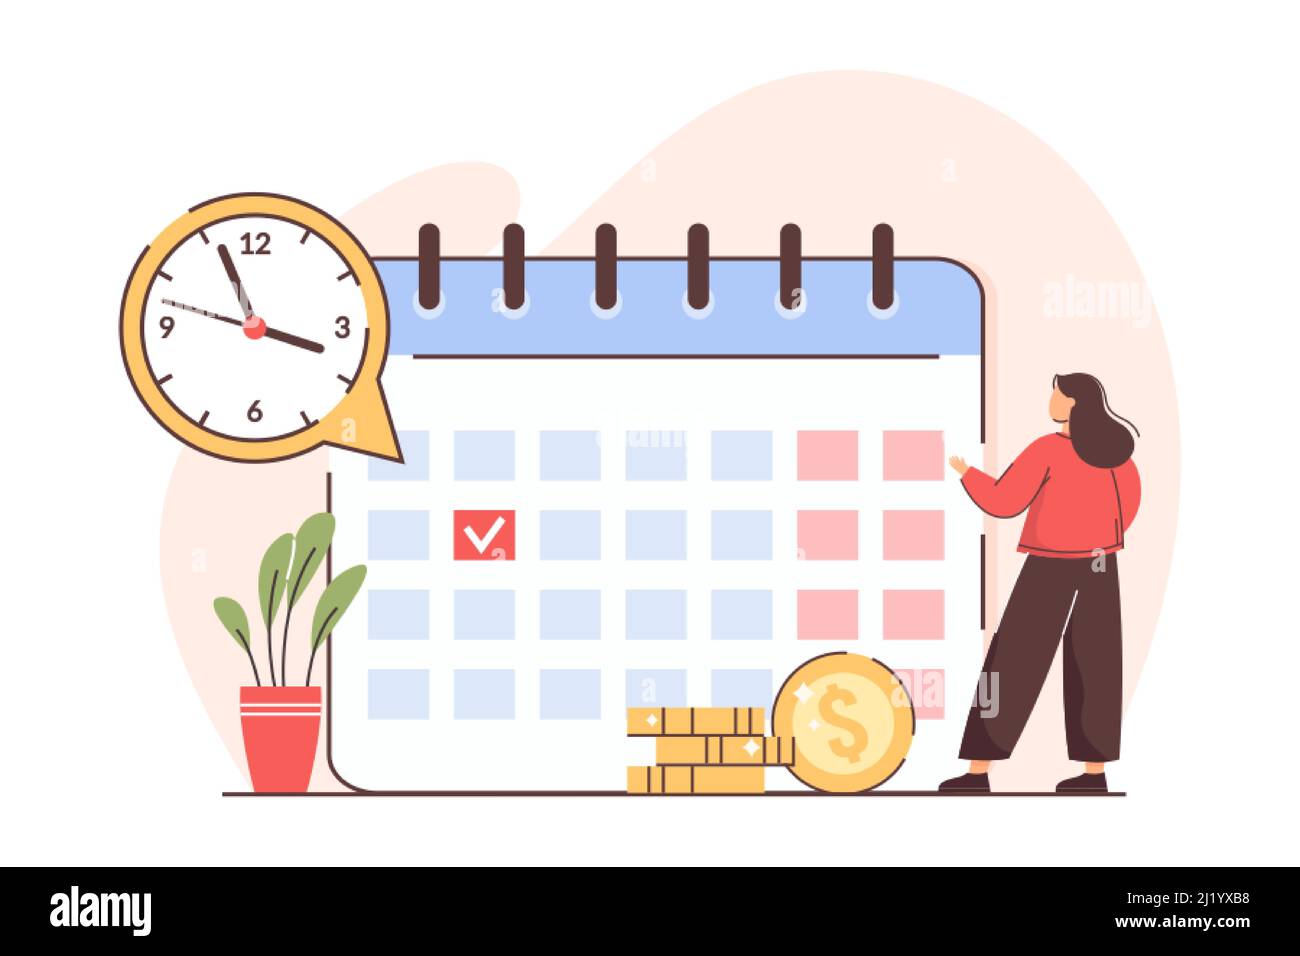 Flat personal financial bill payment calendar. Woman check pay schedule or payroll. Tax, loan, deadline debt or income due date concept. Payday in time for employee. Monthly budget or salary planning. Stock Vector